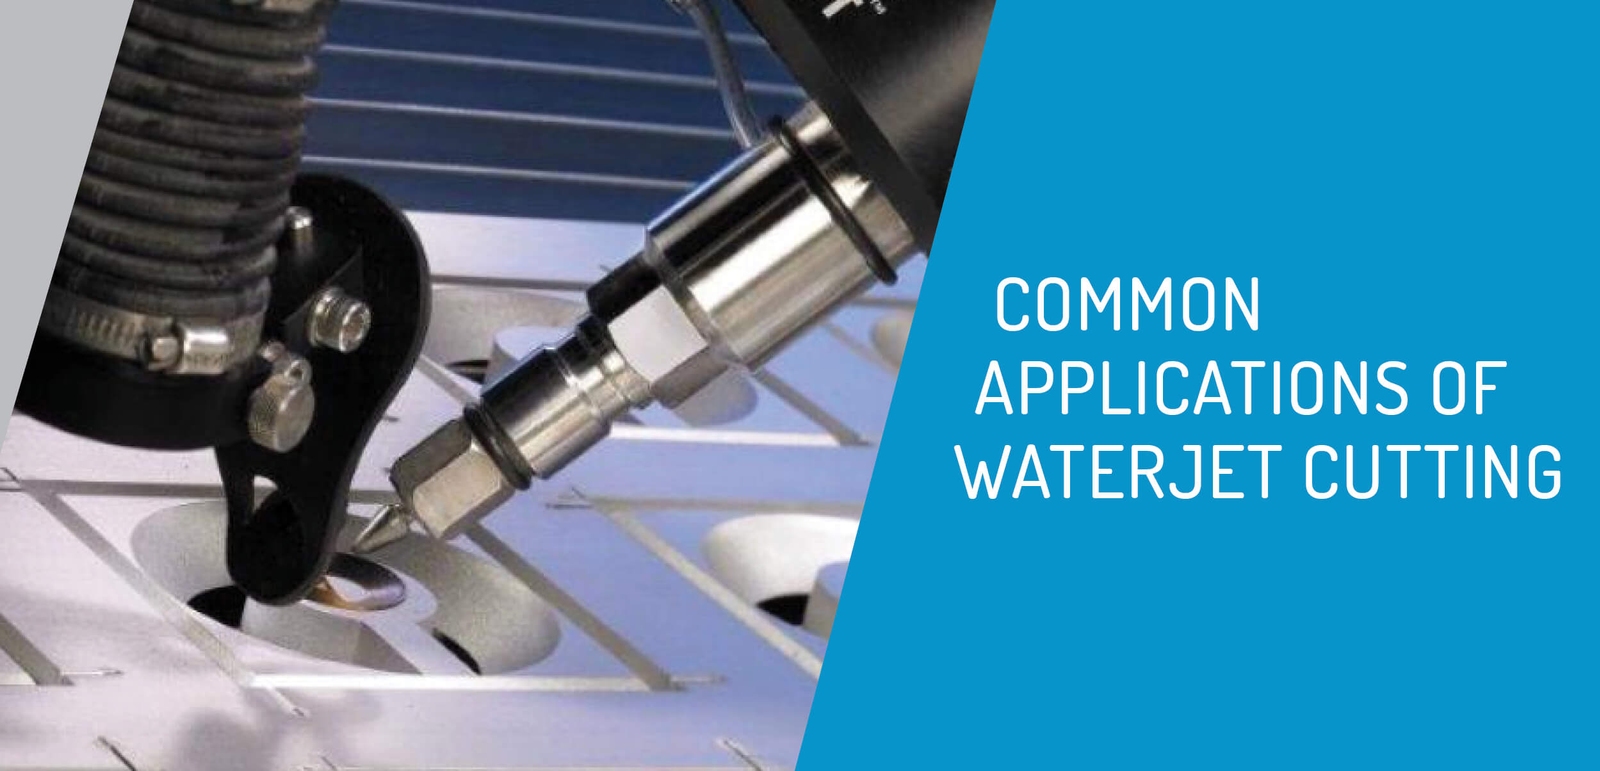 Common Applications of Waterjet Cutting